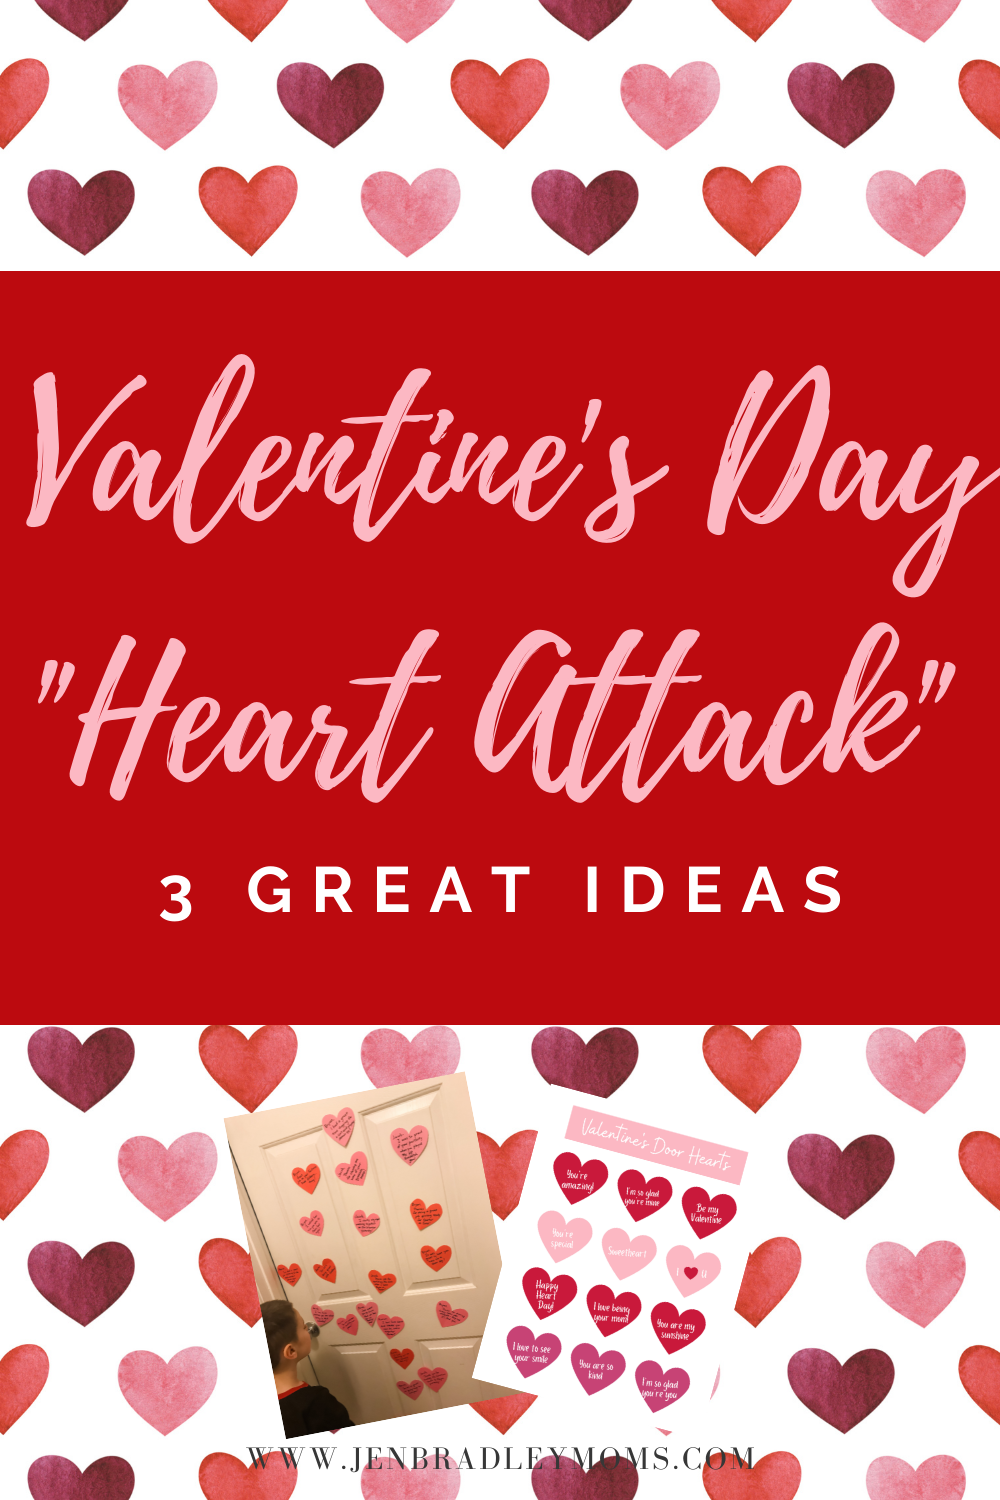 3 Awesome Valentine’s Heart Attack Door Ideas for Kids